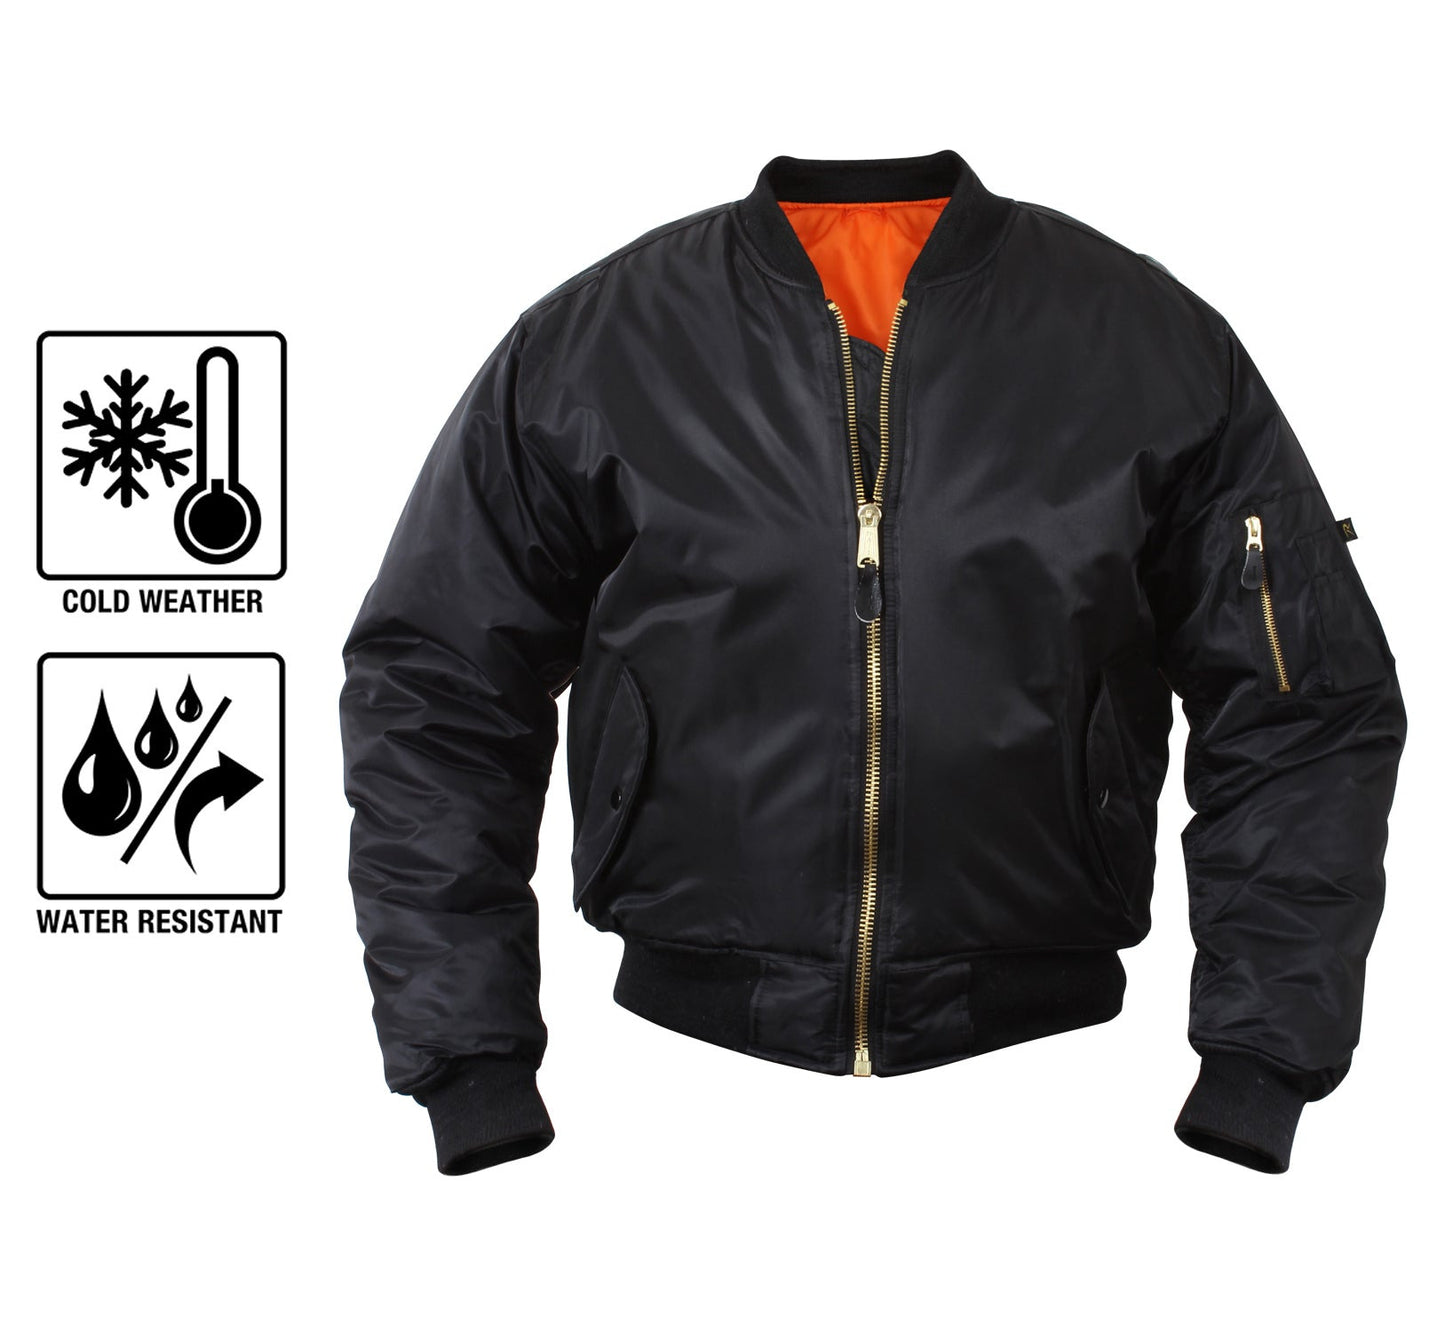 Rothco's MA-1 Flight Jacket features a fully reversible rescue orange polyester lining, and a 100% nylon water repellent outer shell to give a classic bomber jacket look